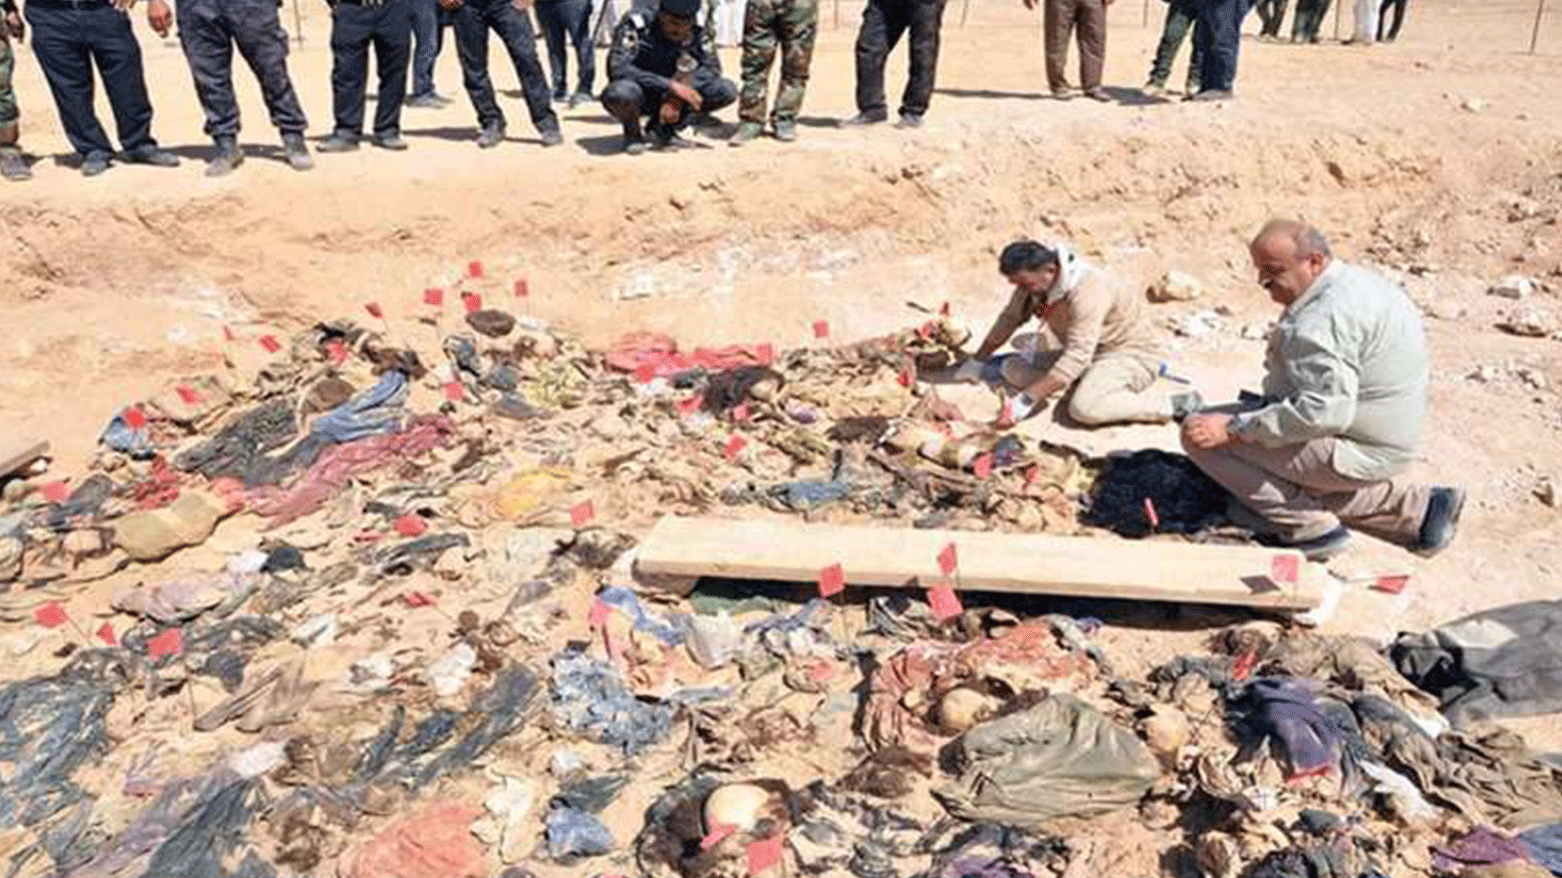 Forensics team inspects exhumed bodies of Anfal victims. (Photo: Kurdistan24)